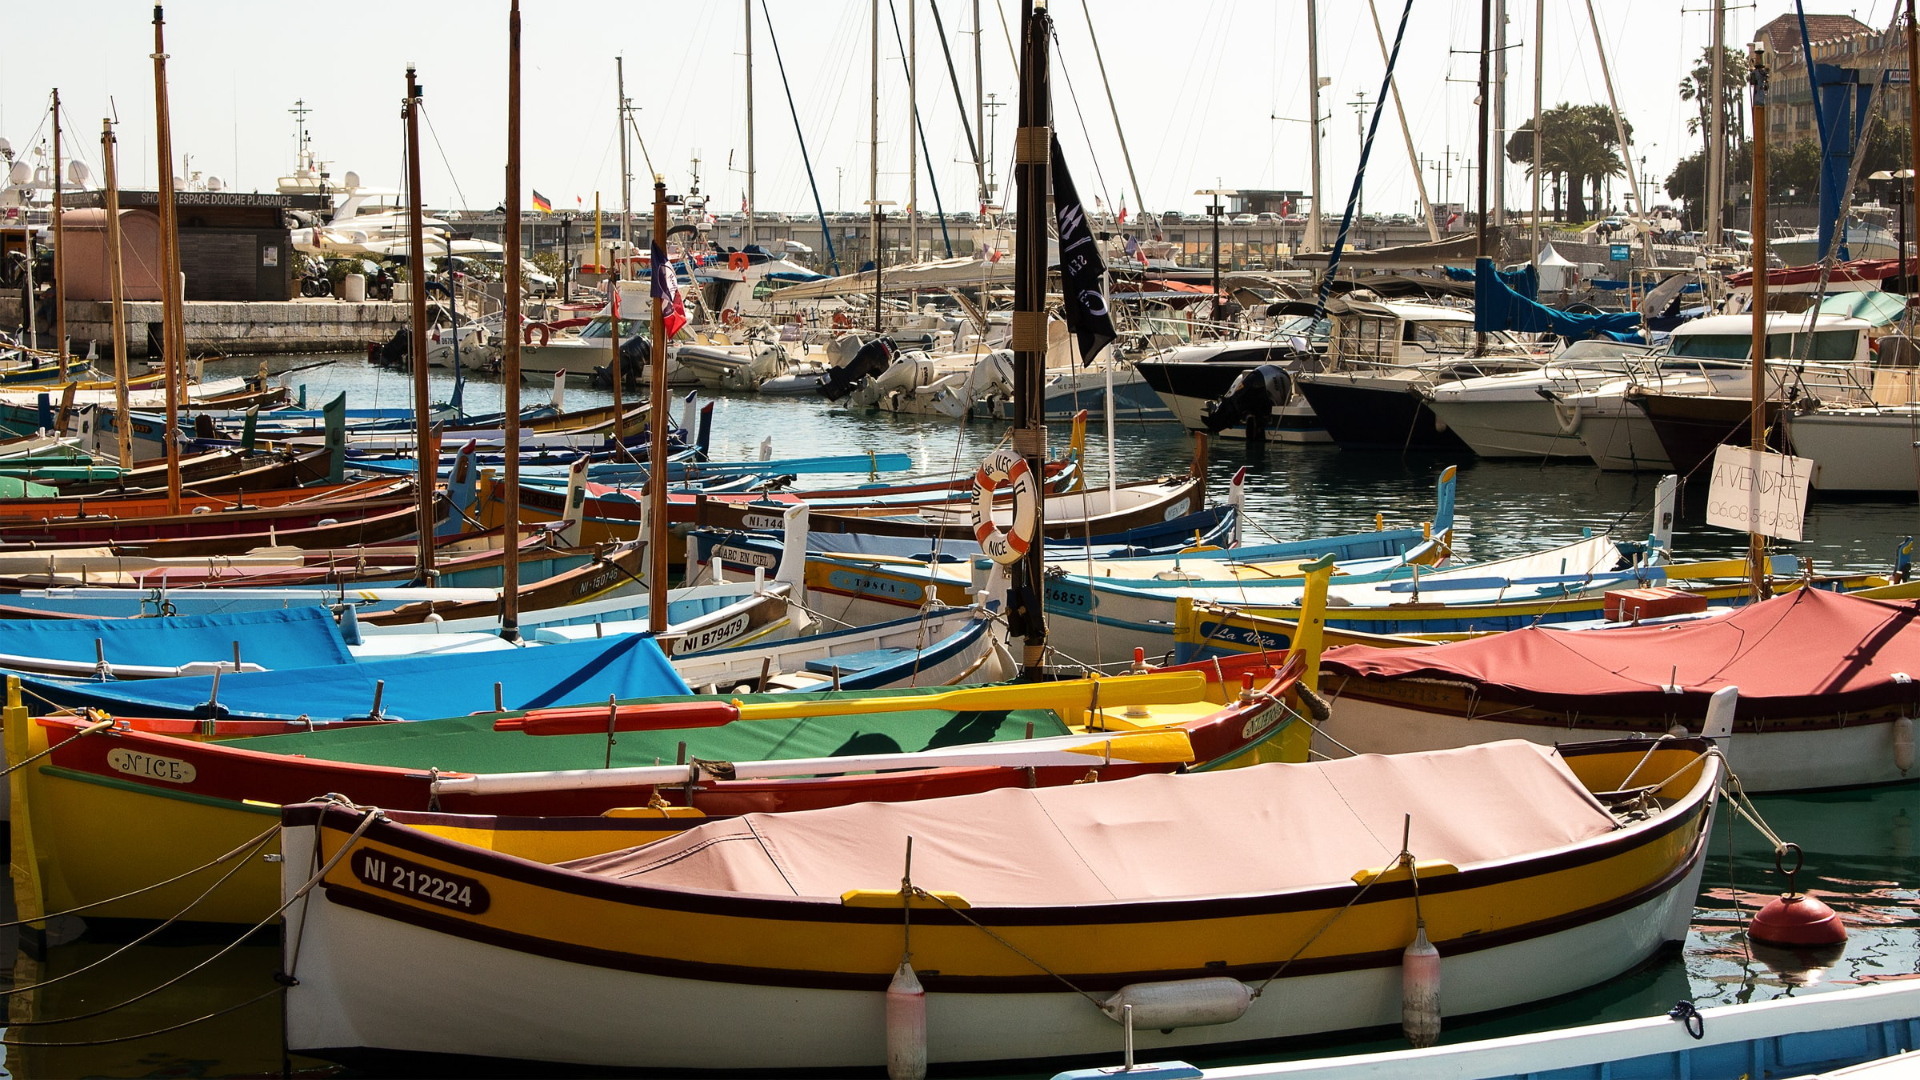 Fishing boats, parked at the dock